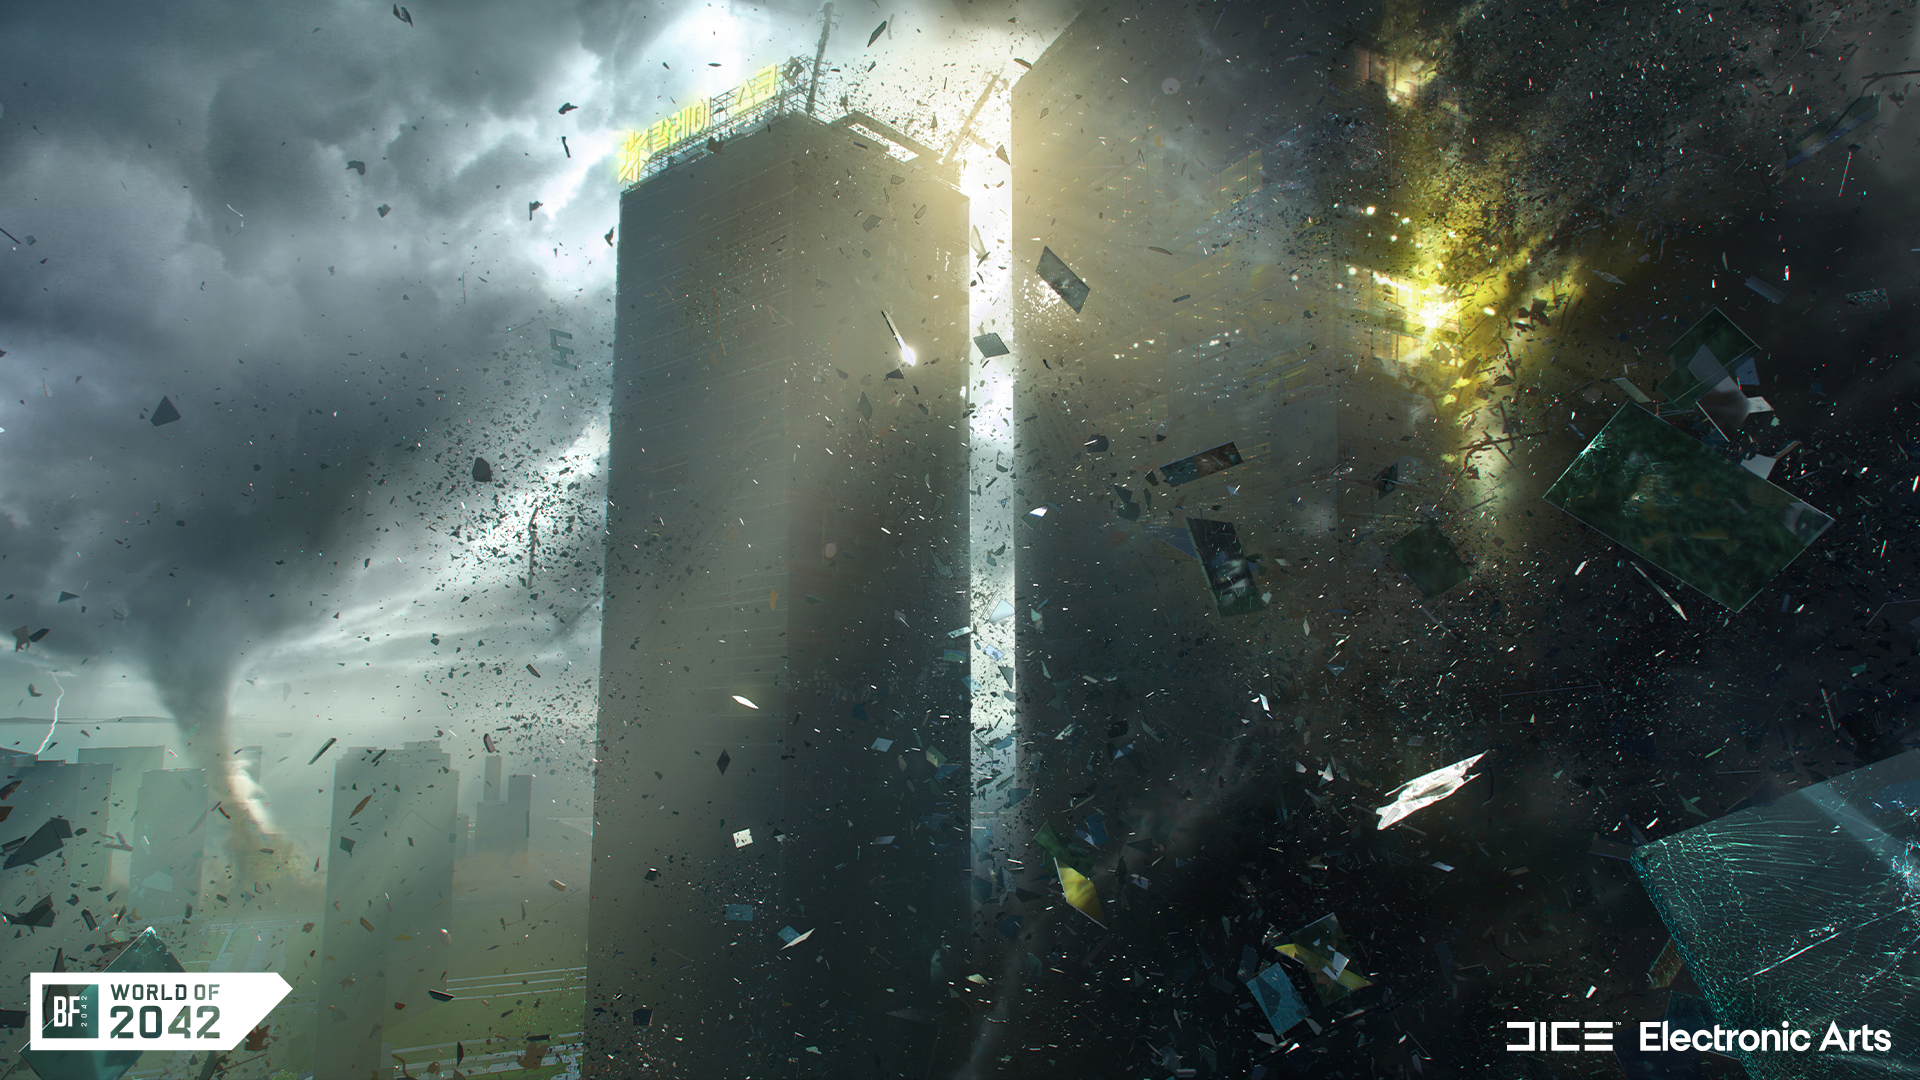 Confirmed: Battlefield 2042 To Support Cross-Play Between PC And